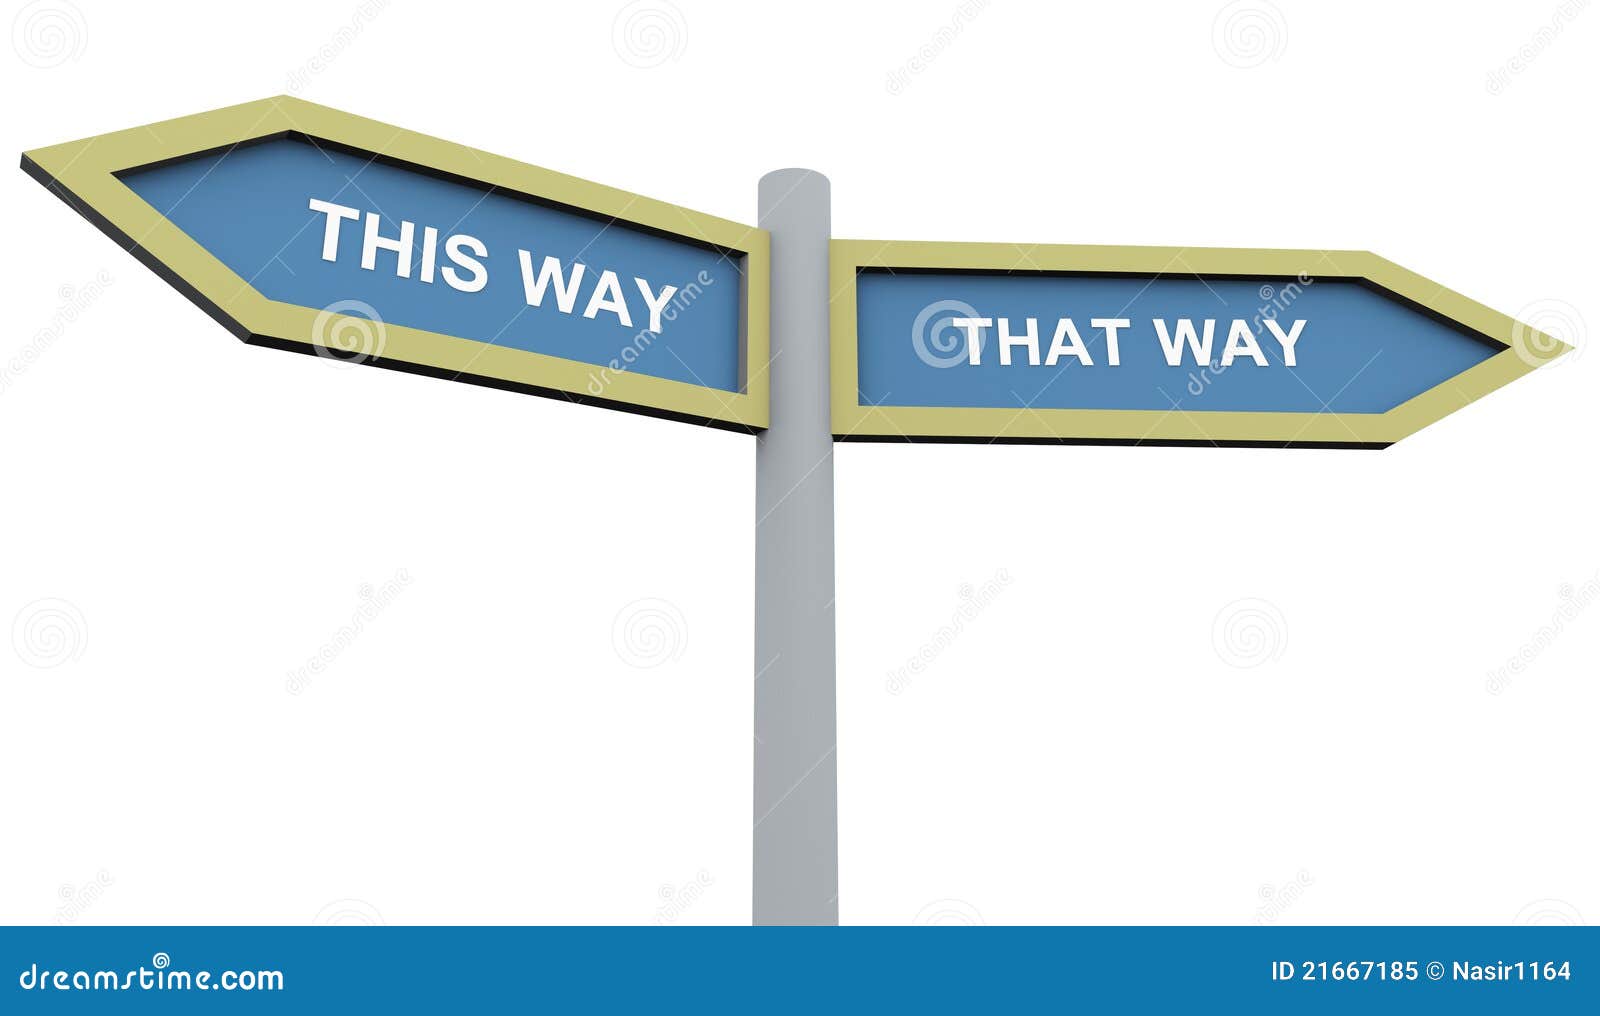 Right this way. This way. This way or that way. Sign that way. Way illustration.